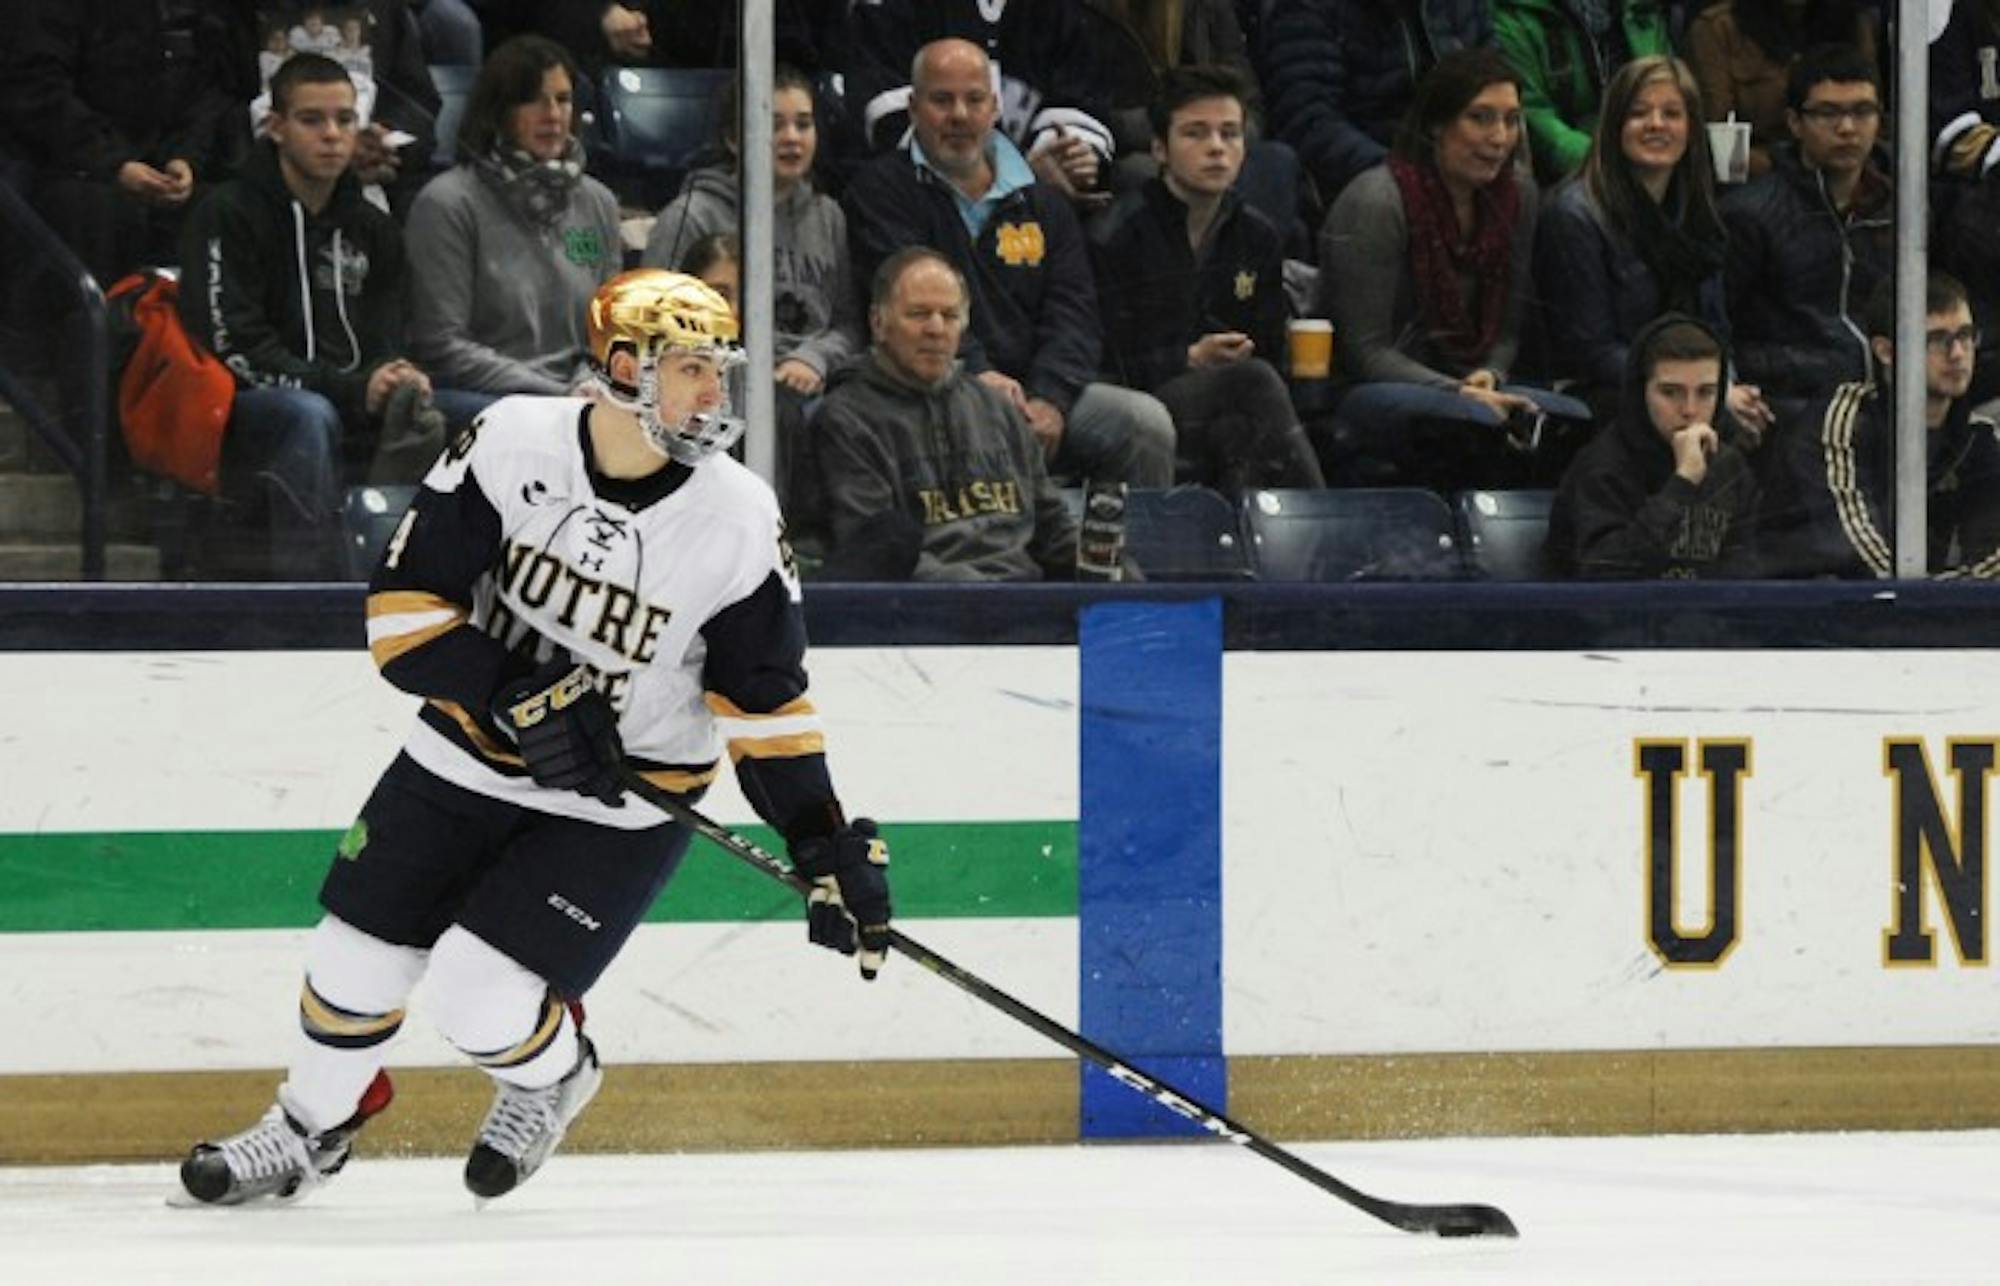 Irish sophomore defenseman Dennis Gilbert looks to move the puck during Notre Dame’s 2-2 tie in overtime against New Hampshire on Jan. 20.